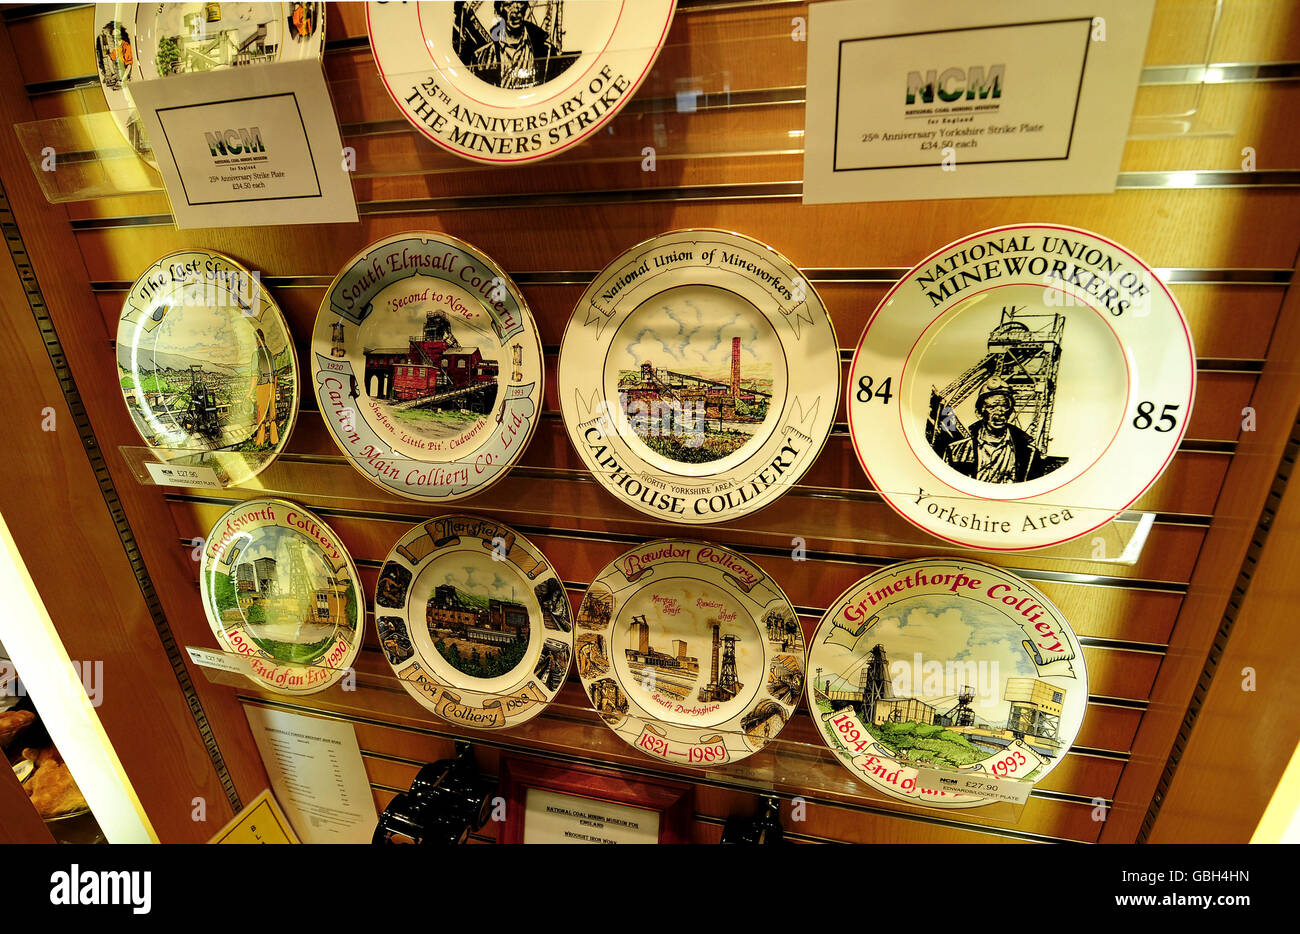 Commemorative plates of Coal Mining history, for sale at the National Mining Museum at Caphouse Colliery near Wakefield. A new plate commemorating the 25th Anniversary of the Miners Strike which began this month 25 years ago (top right) stands among others showing Pits that closed following the year long dispute. Stock Photo